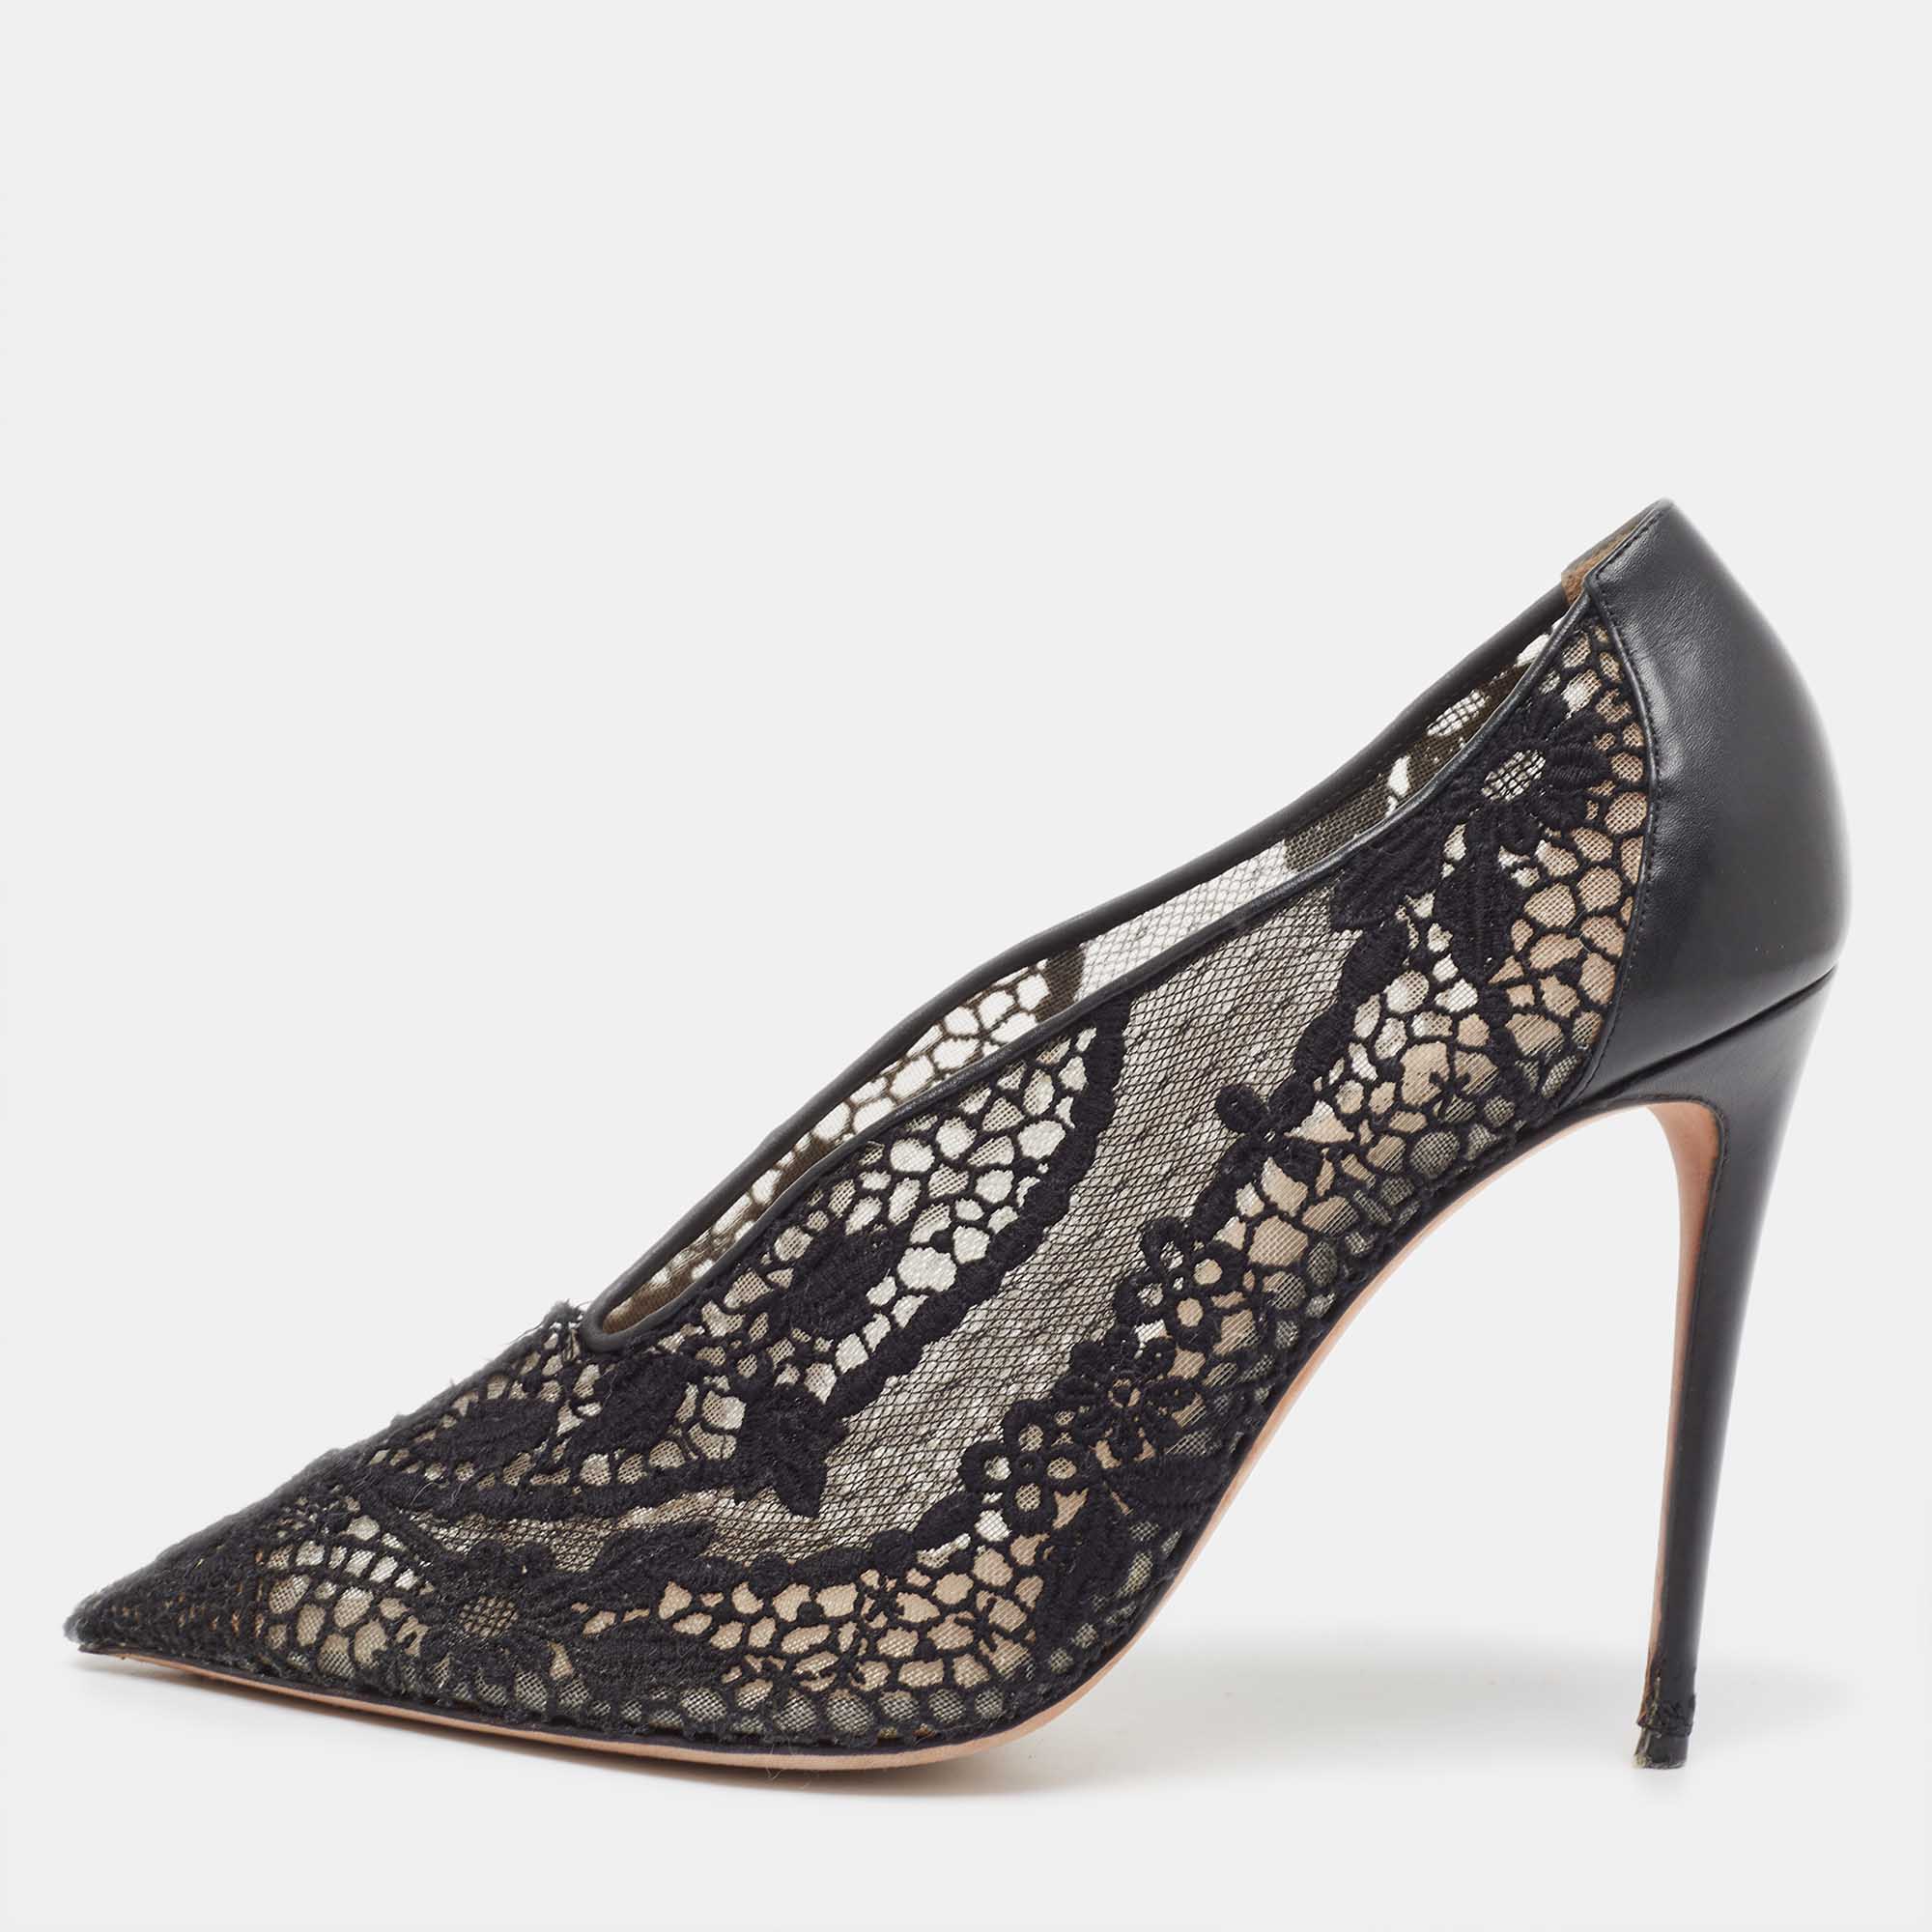 A feminine flair sleekness and a timeless appeal characterize these stunning pumps from Valentino. Made from dainty black lace and leather on the exterior they are adorned with pointed toes and raised on slender heels. Subtle and stylish these pumps will make you look elegant.